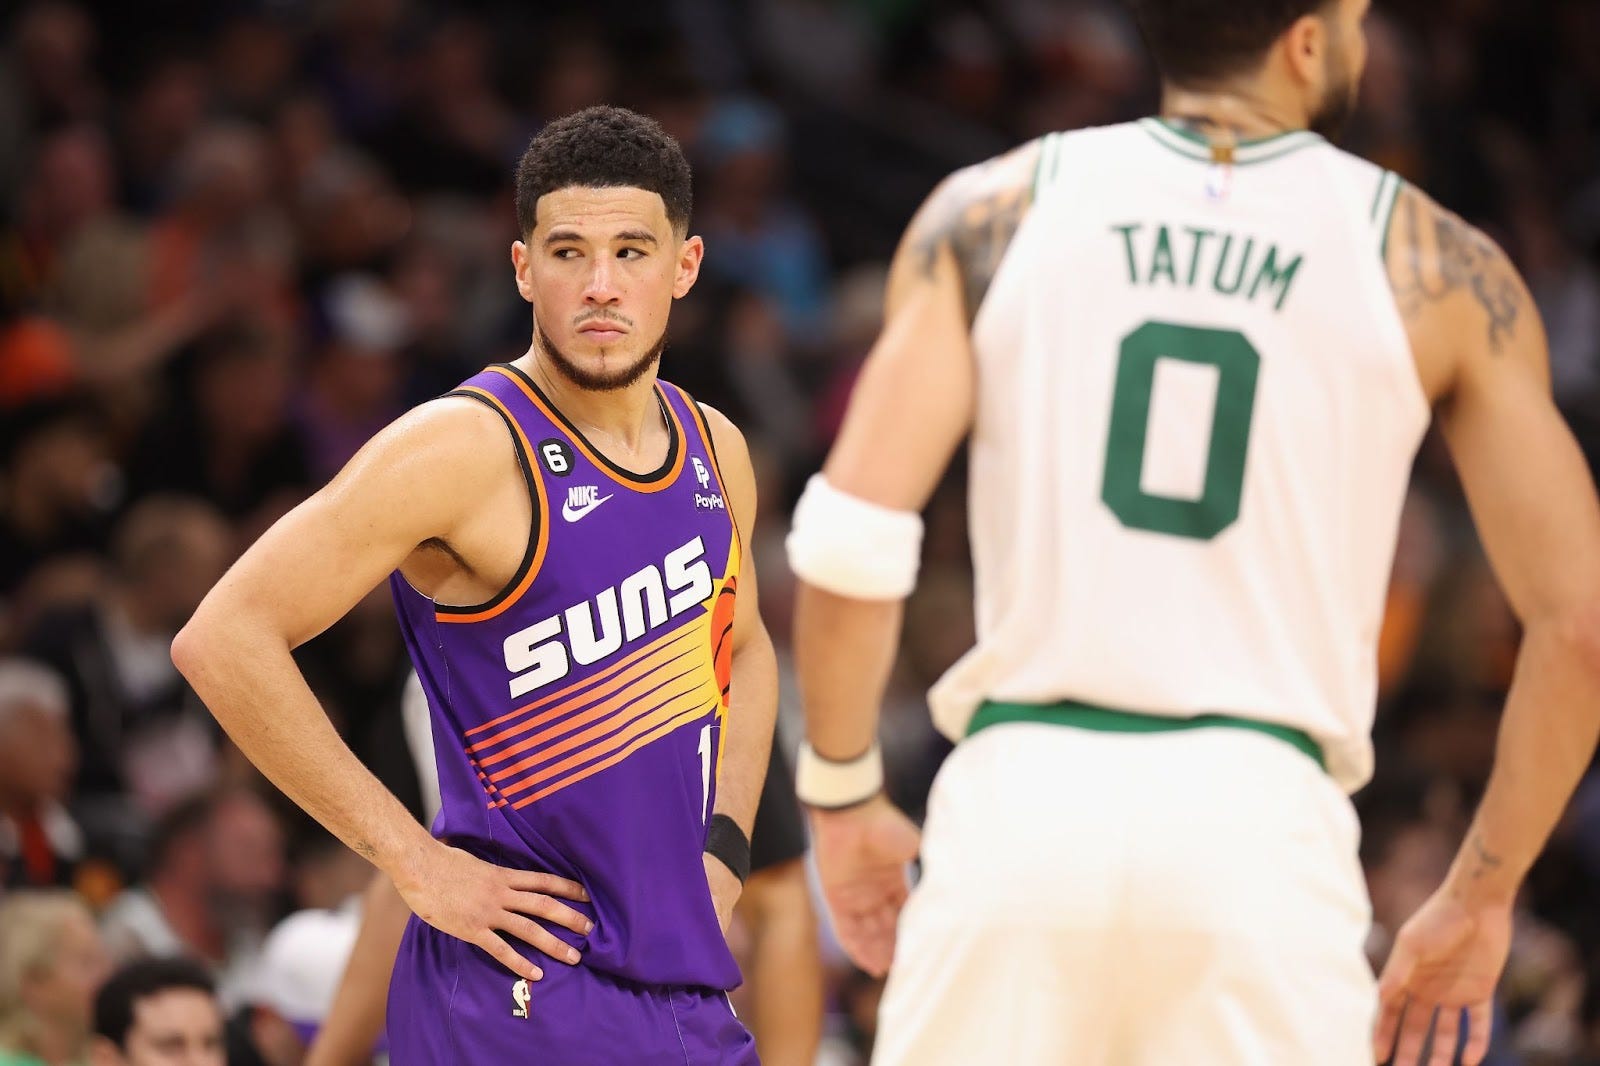 Don't Sleep on the Suns (at the Deadline or in the Playoffs) - The